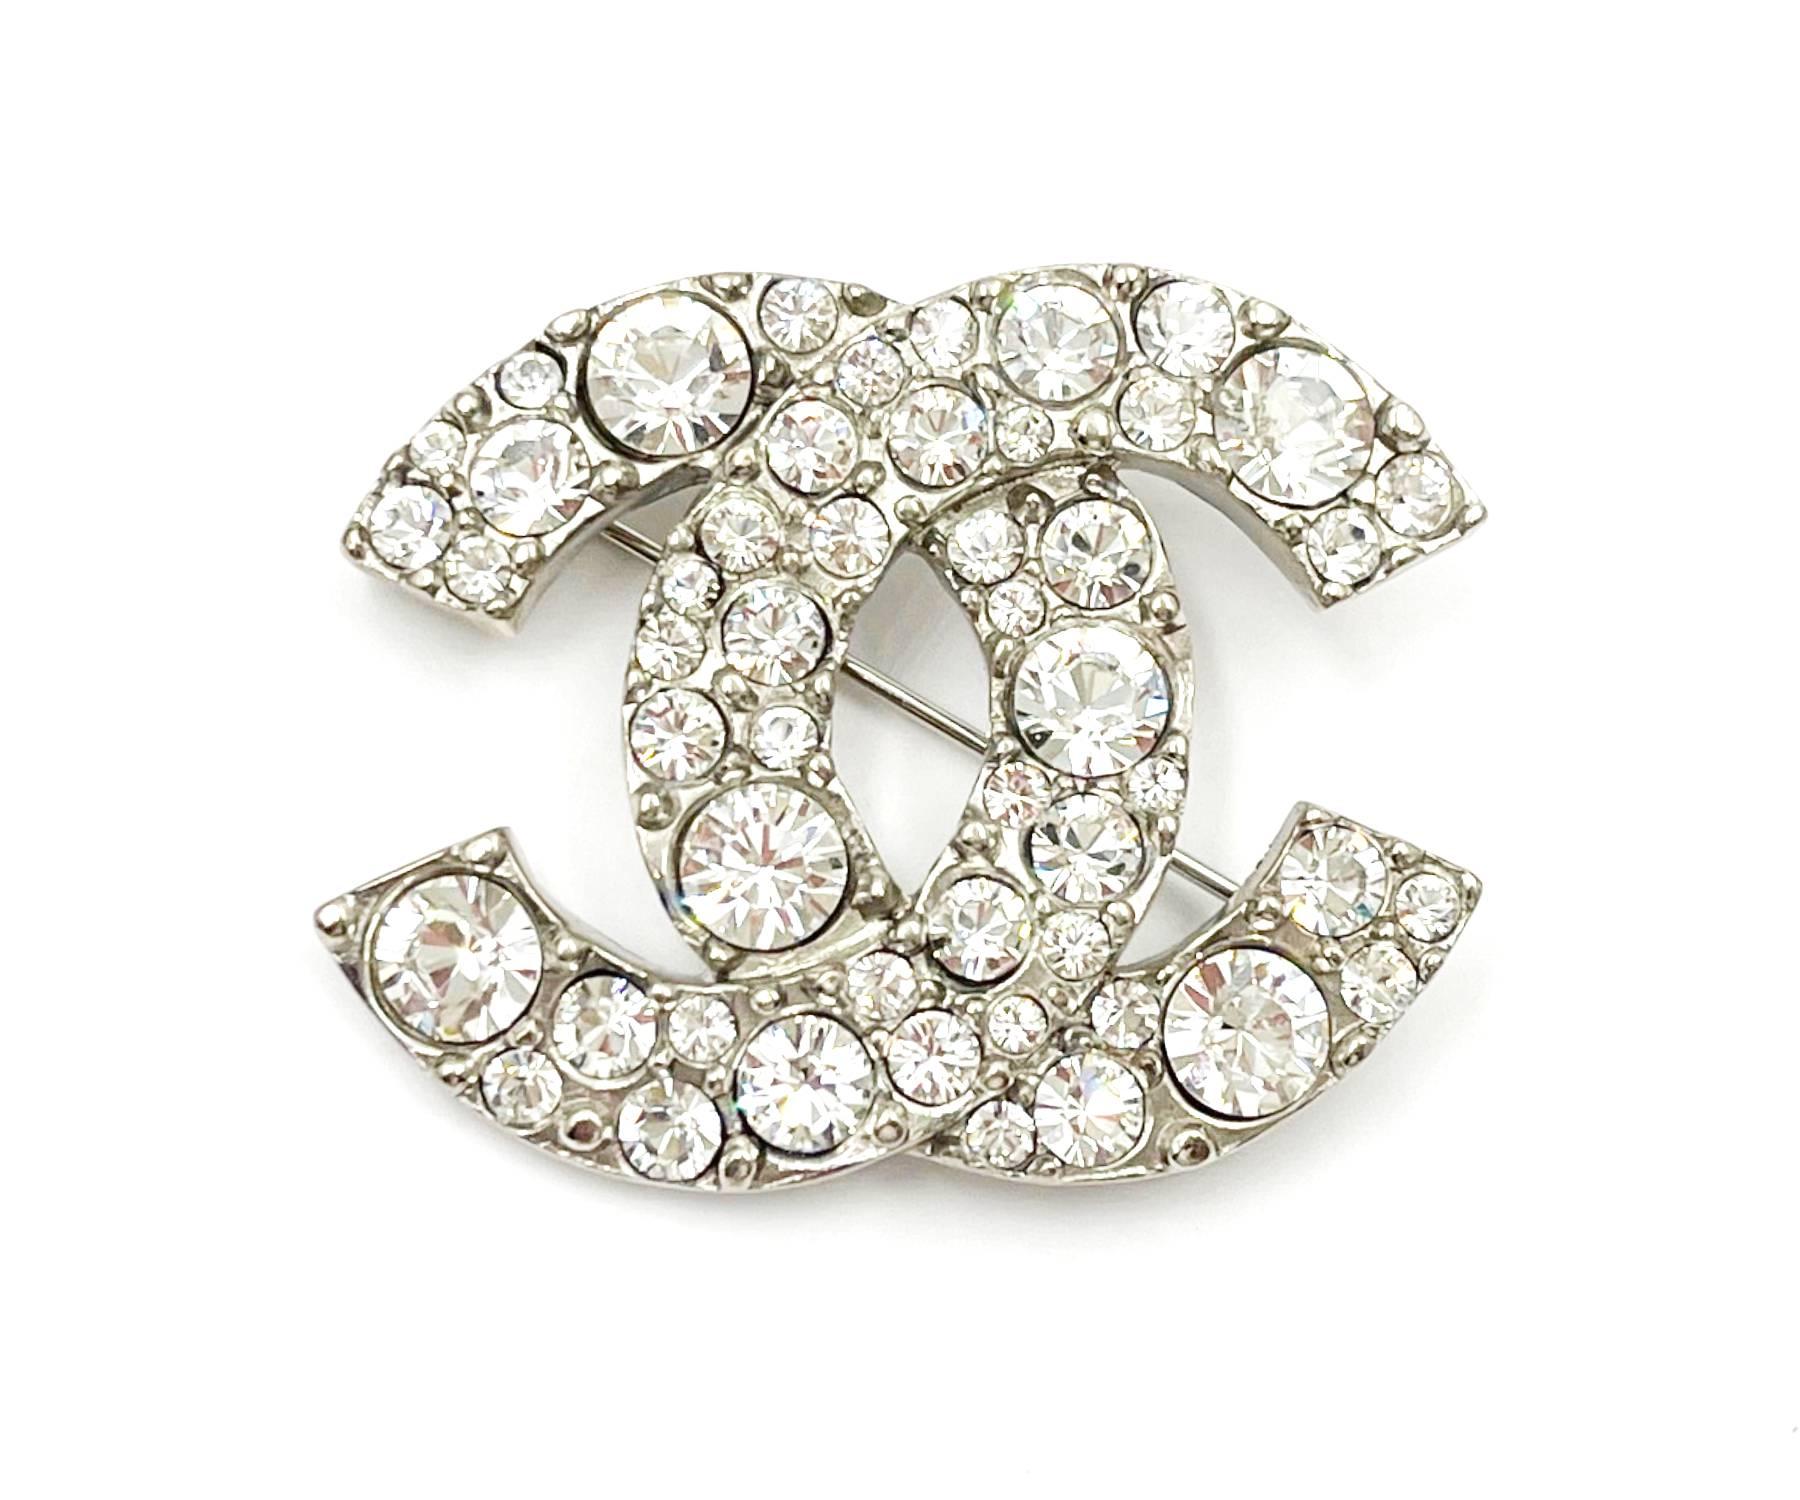 Chanel Silver CC Round Crystal Brooch

* Marked 12
* Made in France
* Comes with the original box

-It is approximately 1.75